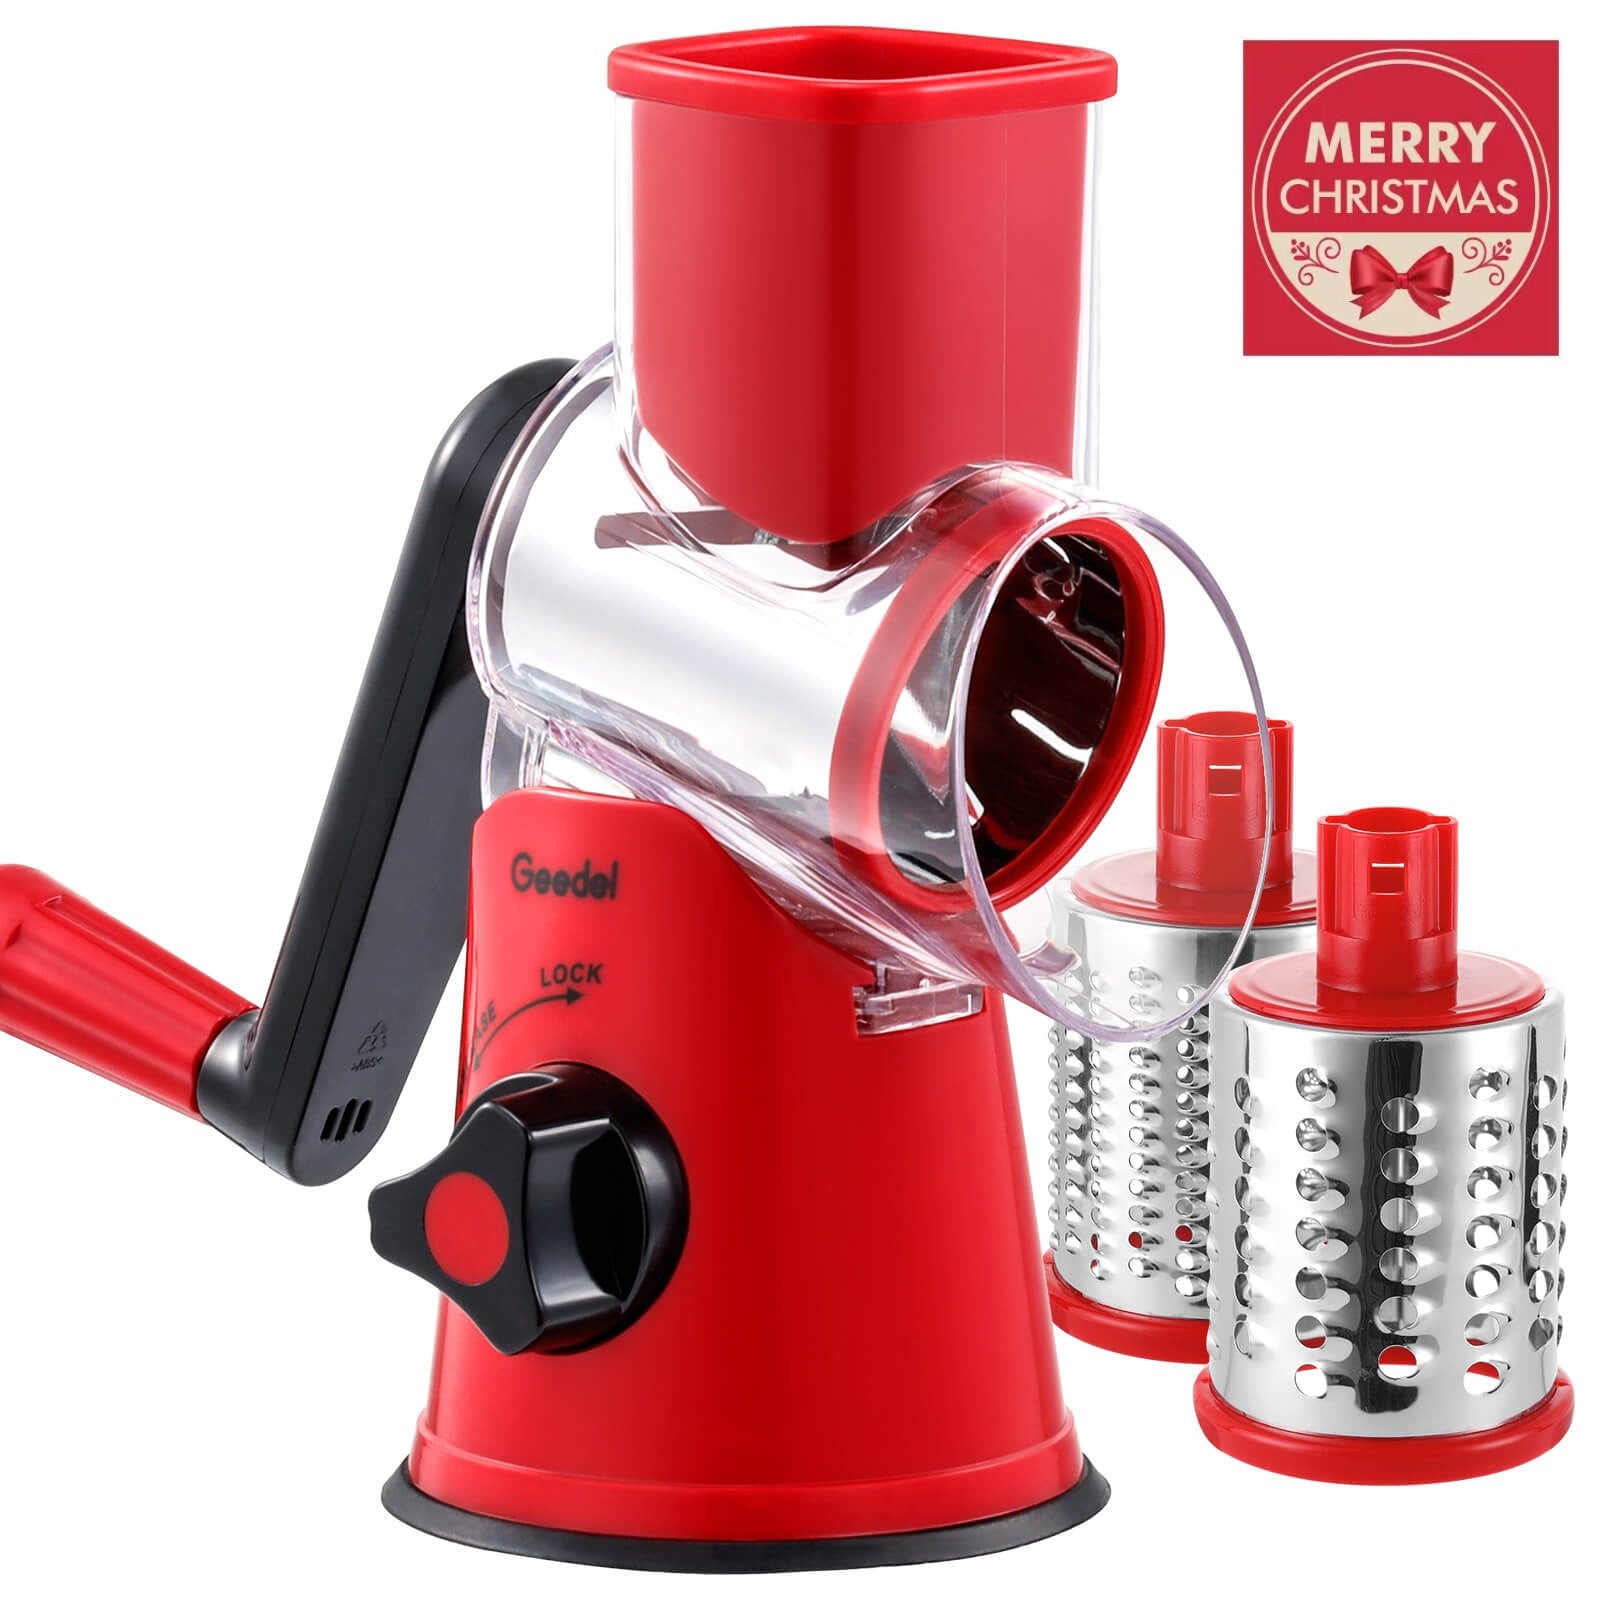 Choice Rotary Grater with Fine and Coarse Drums